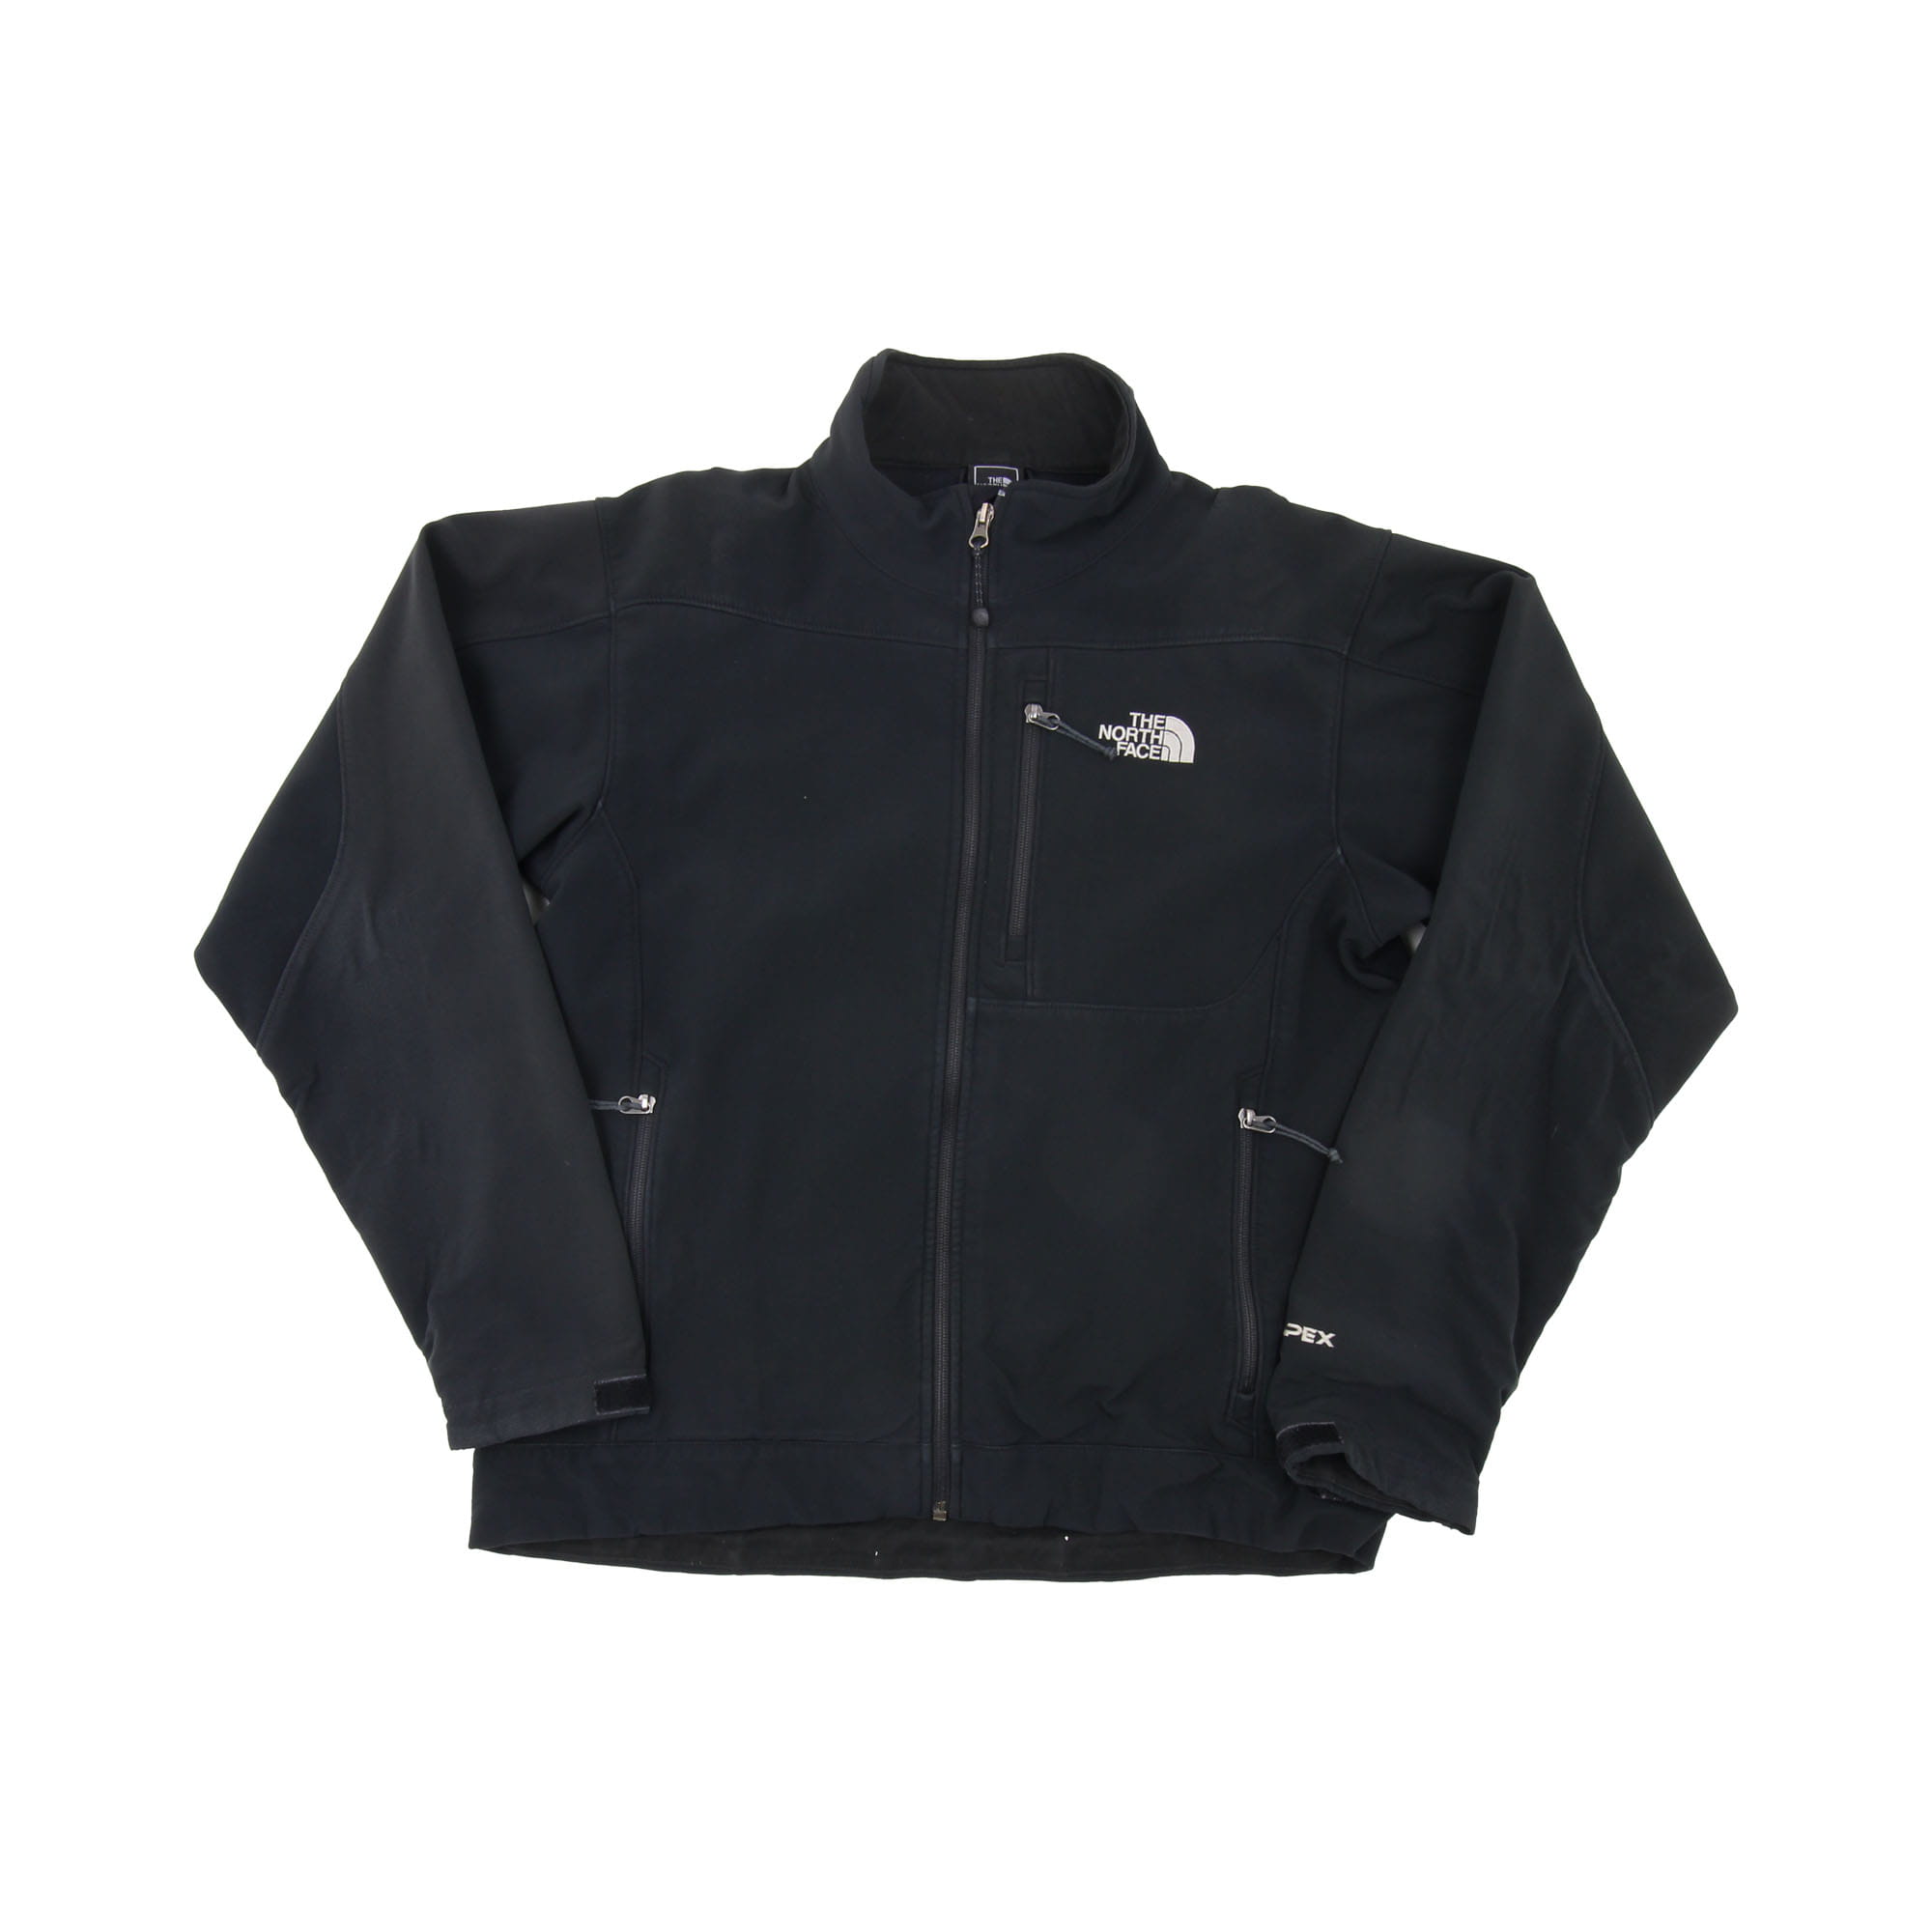 The North Face Wind Jacket Black -  M